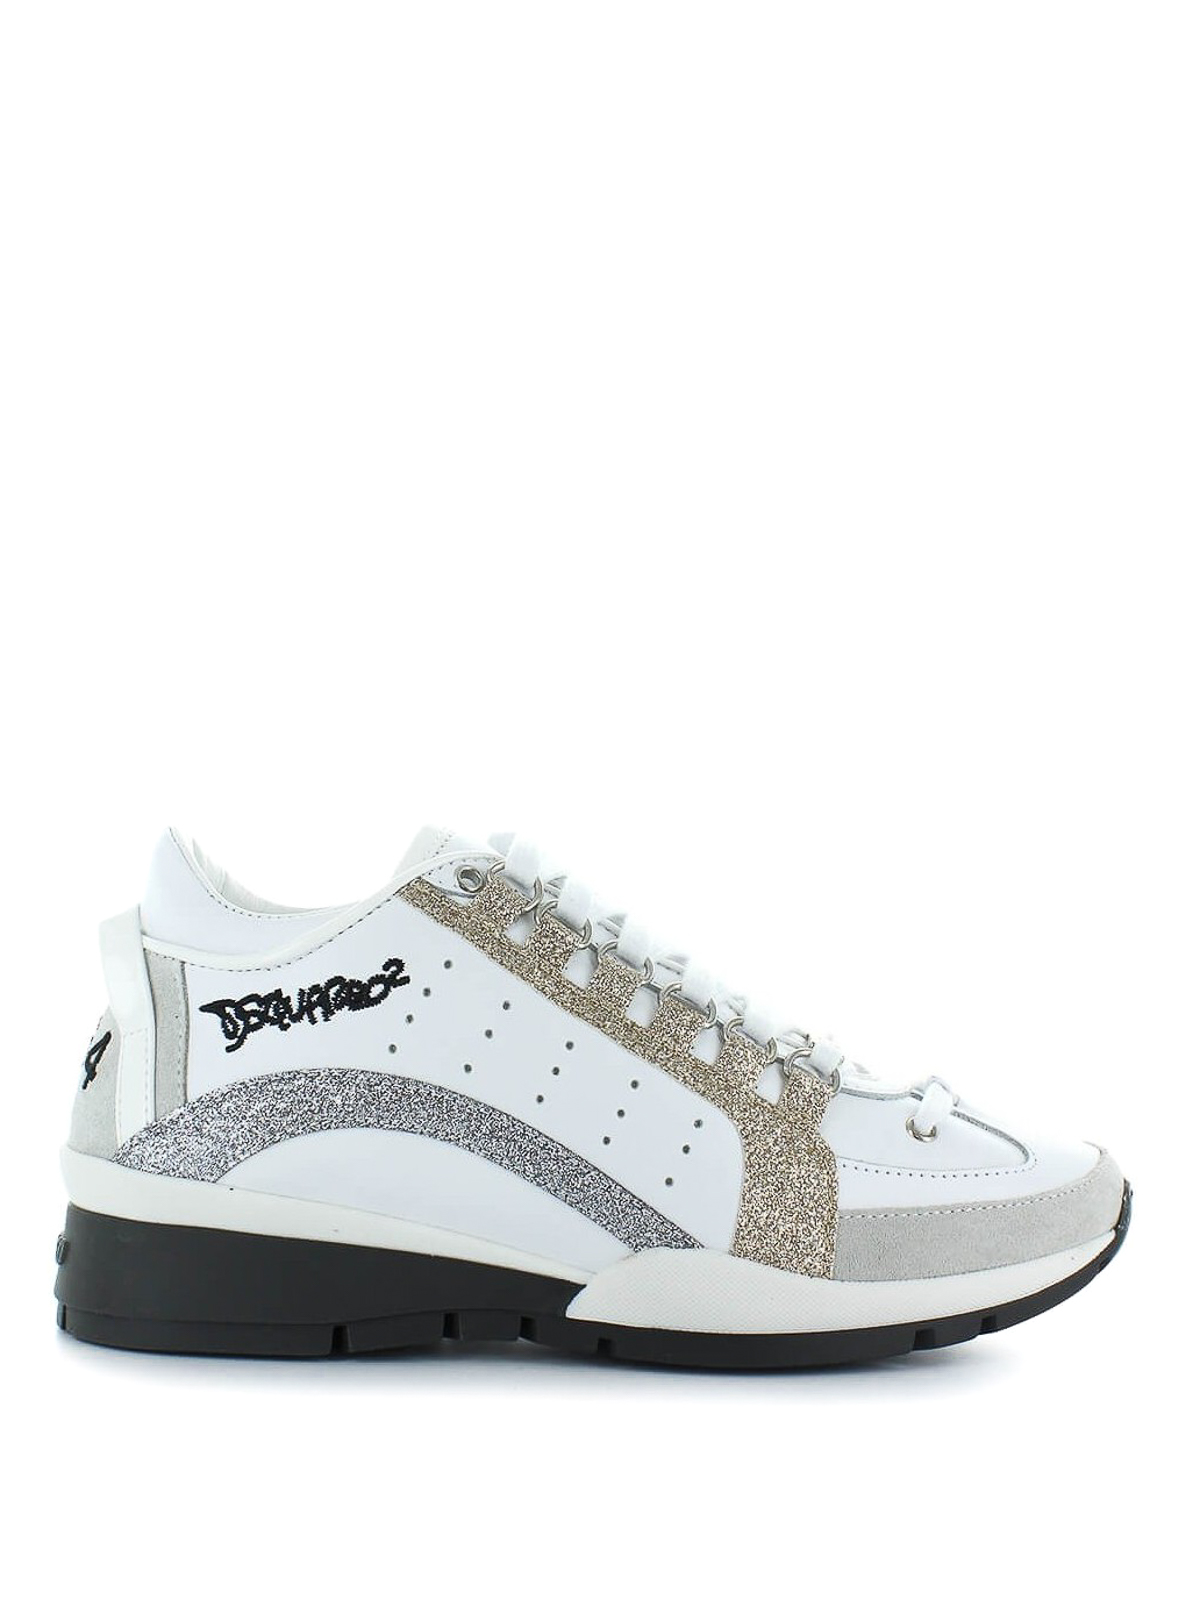 Dsquared2 - white and glitter sneakers - SNW040406501036M241